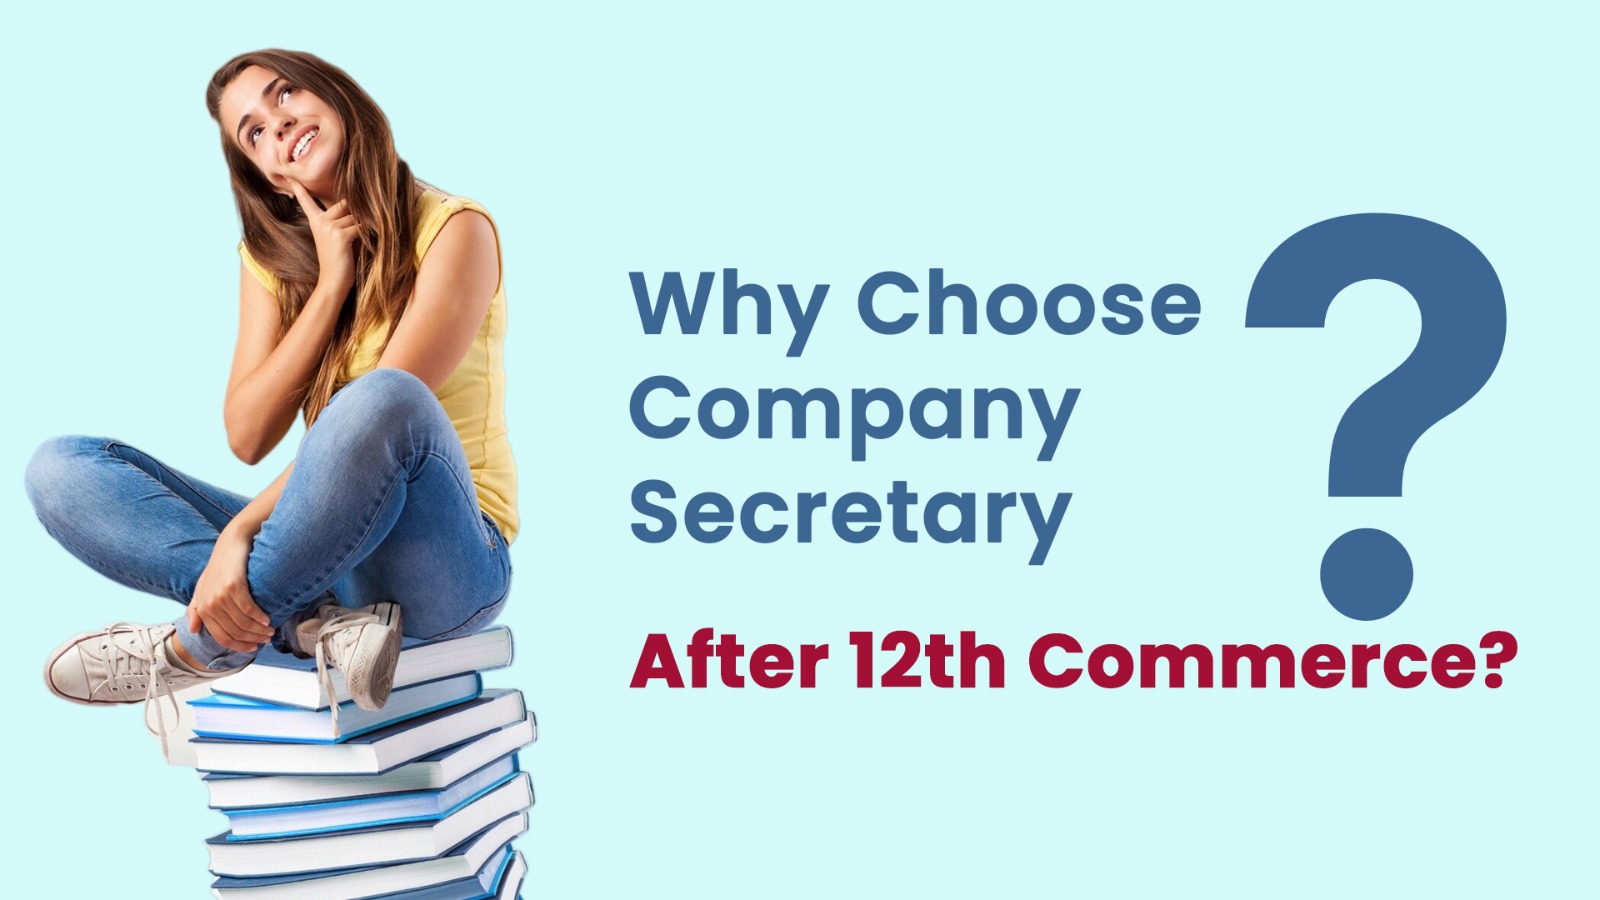 Why Choose Company Secretary After 12th Commerce?